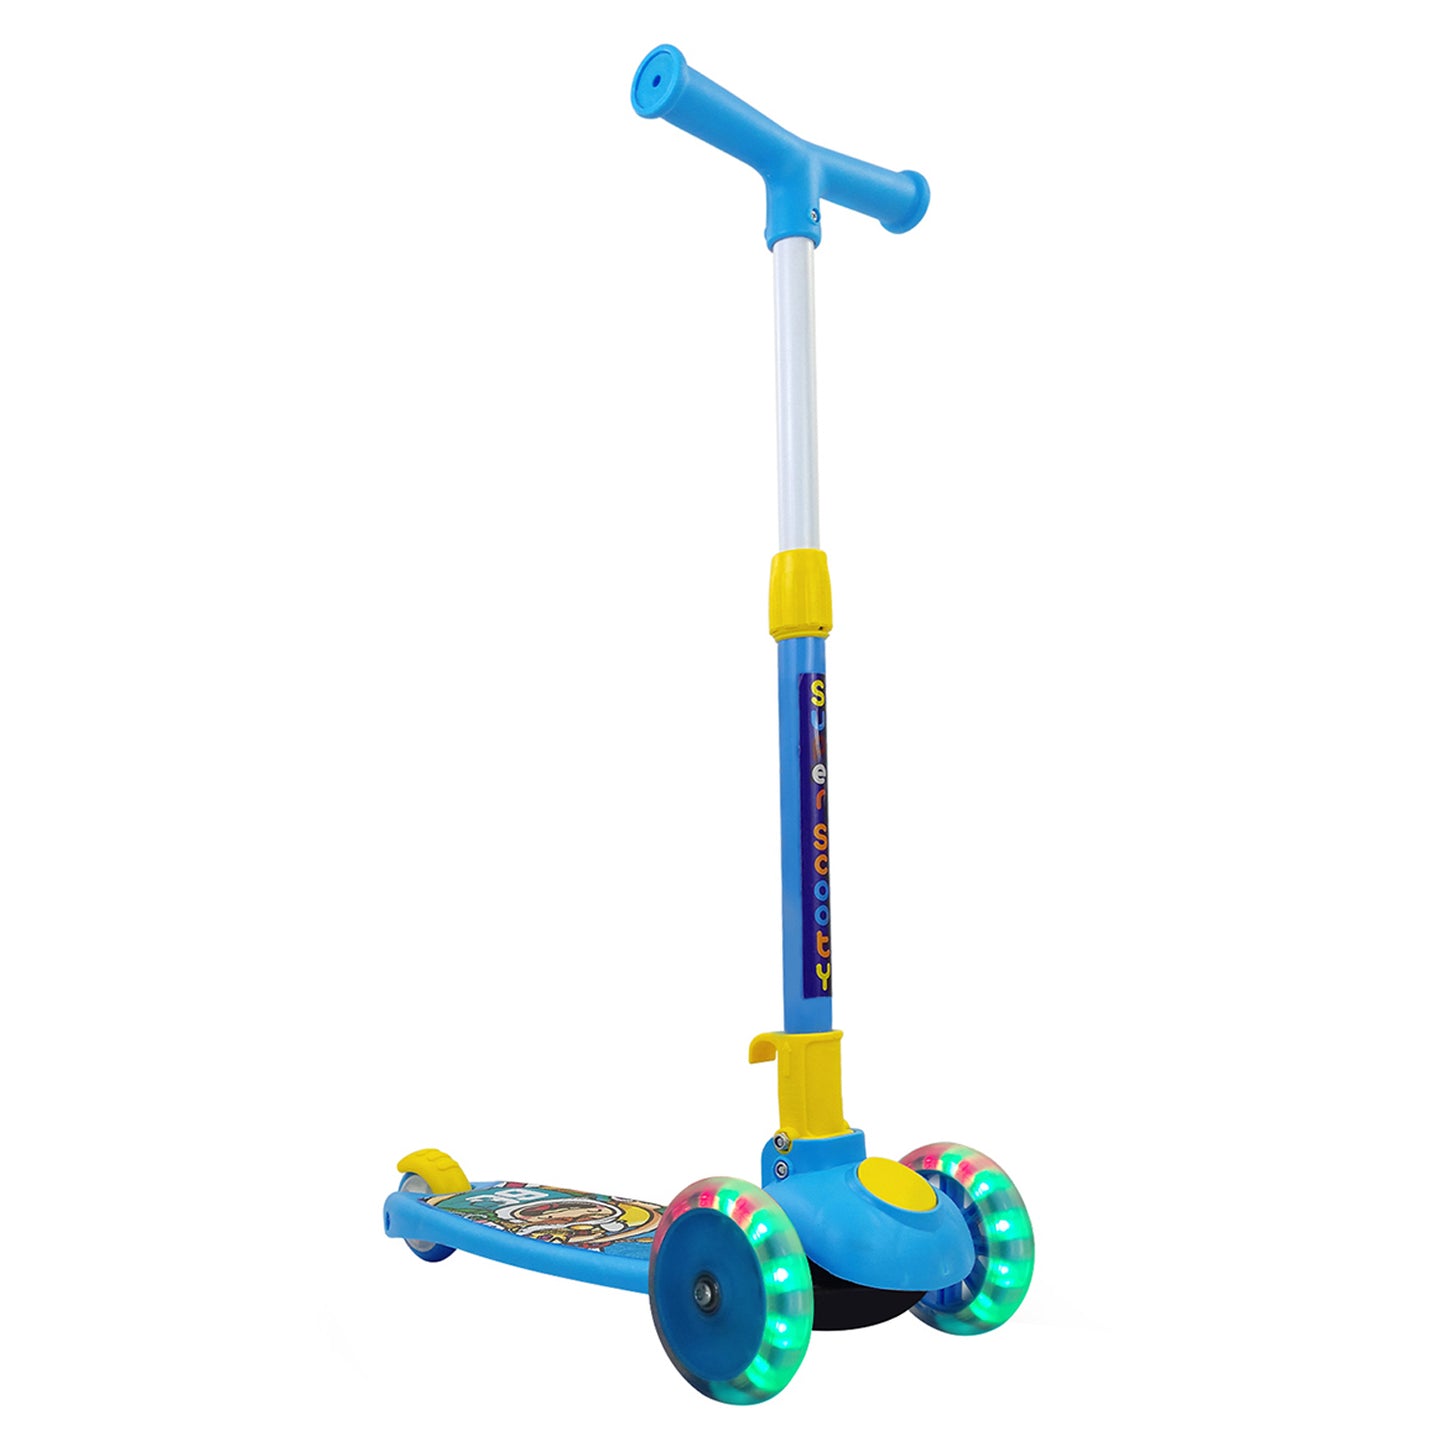 NHR Smart Kick Scooter, Adjustable Height with LED Wheels (Choose Any Color)